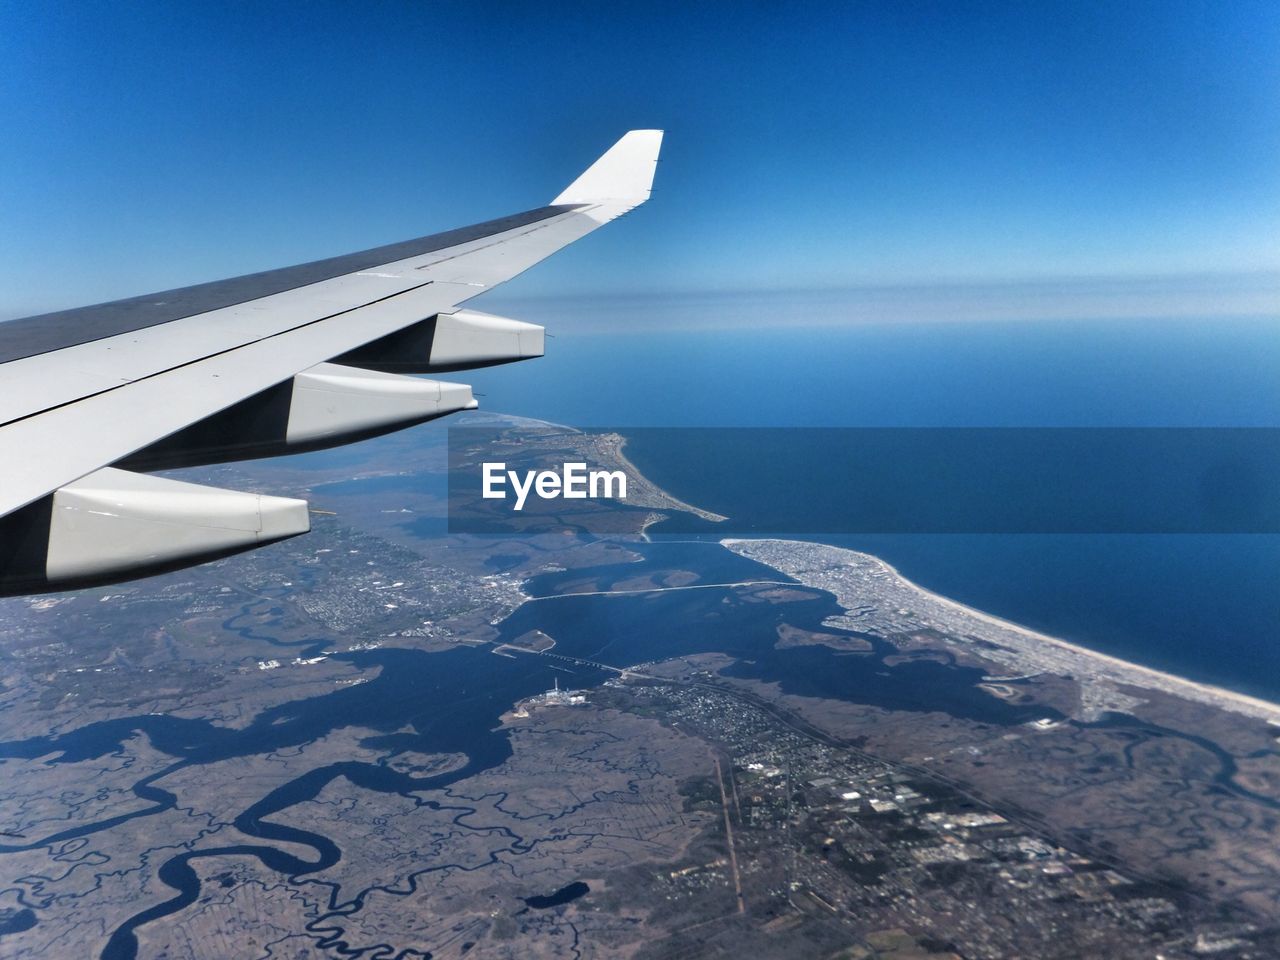 Cropped image of aircraft wing flying over landscape by sea